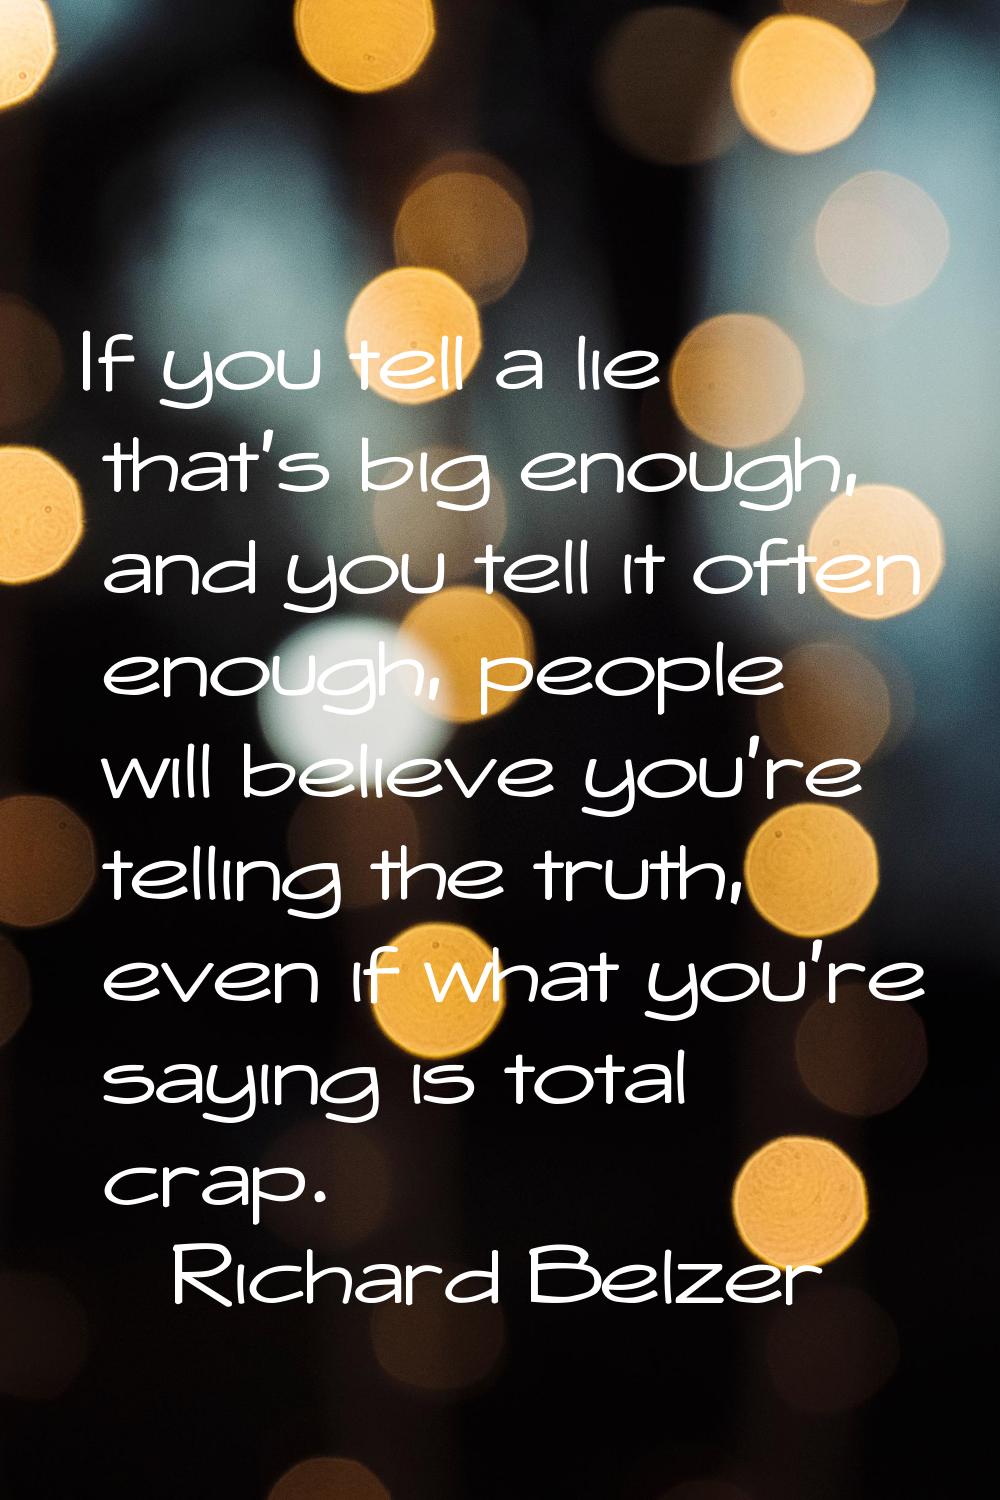 If you tell a lie that's big enough, and you tell it often enough, people will believe you're telli